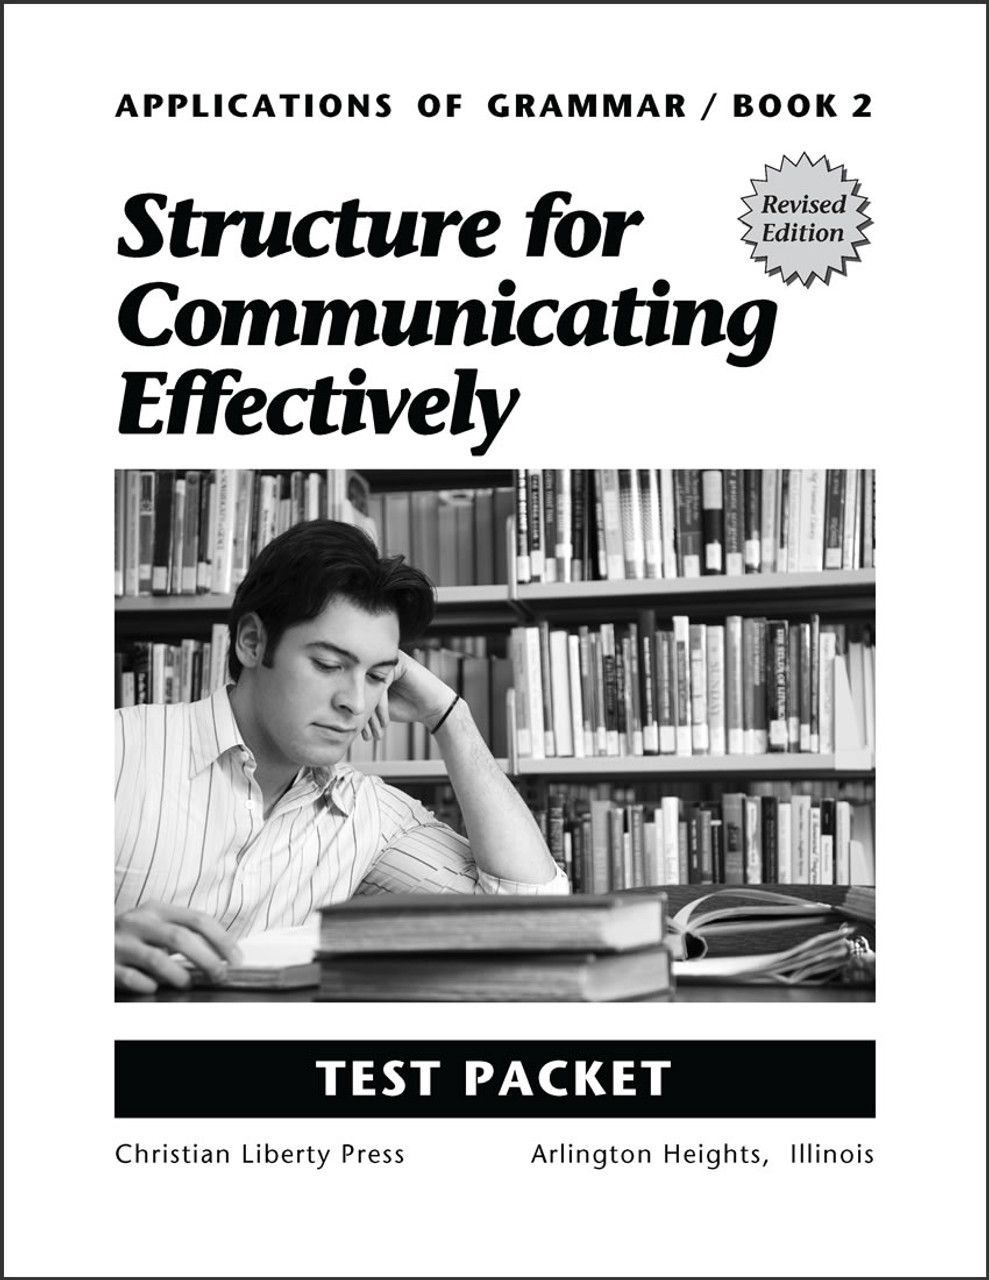 Applications of Grammar Book 2: Structure for Communicating Effectively